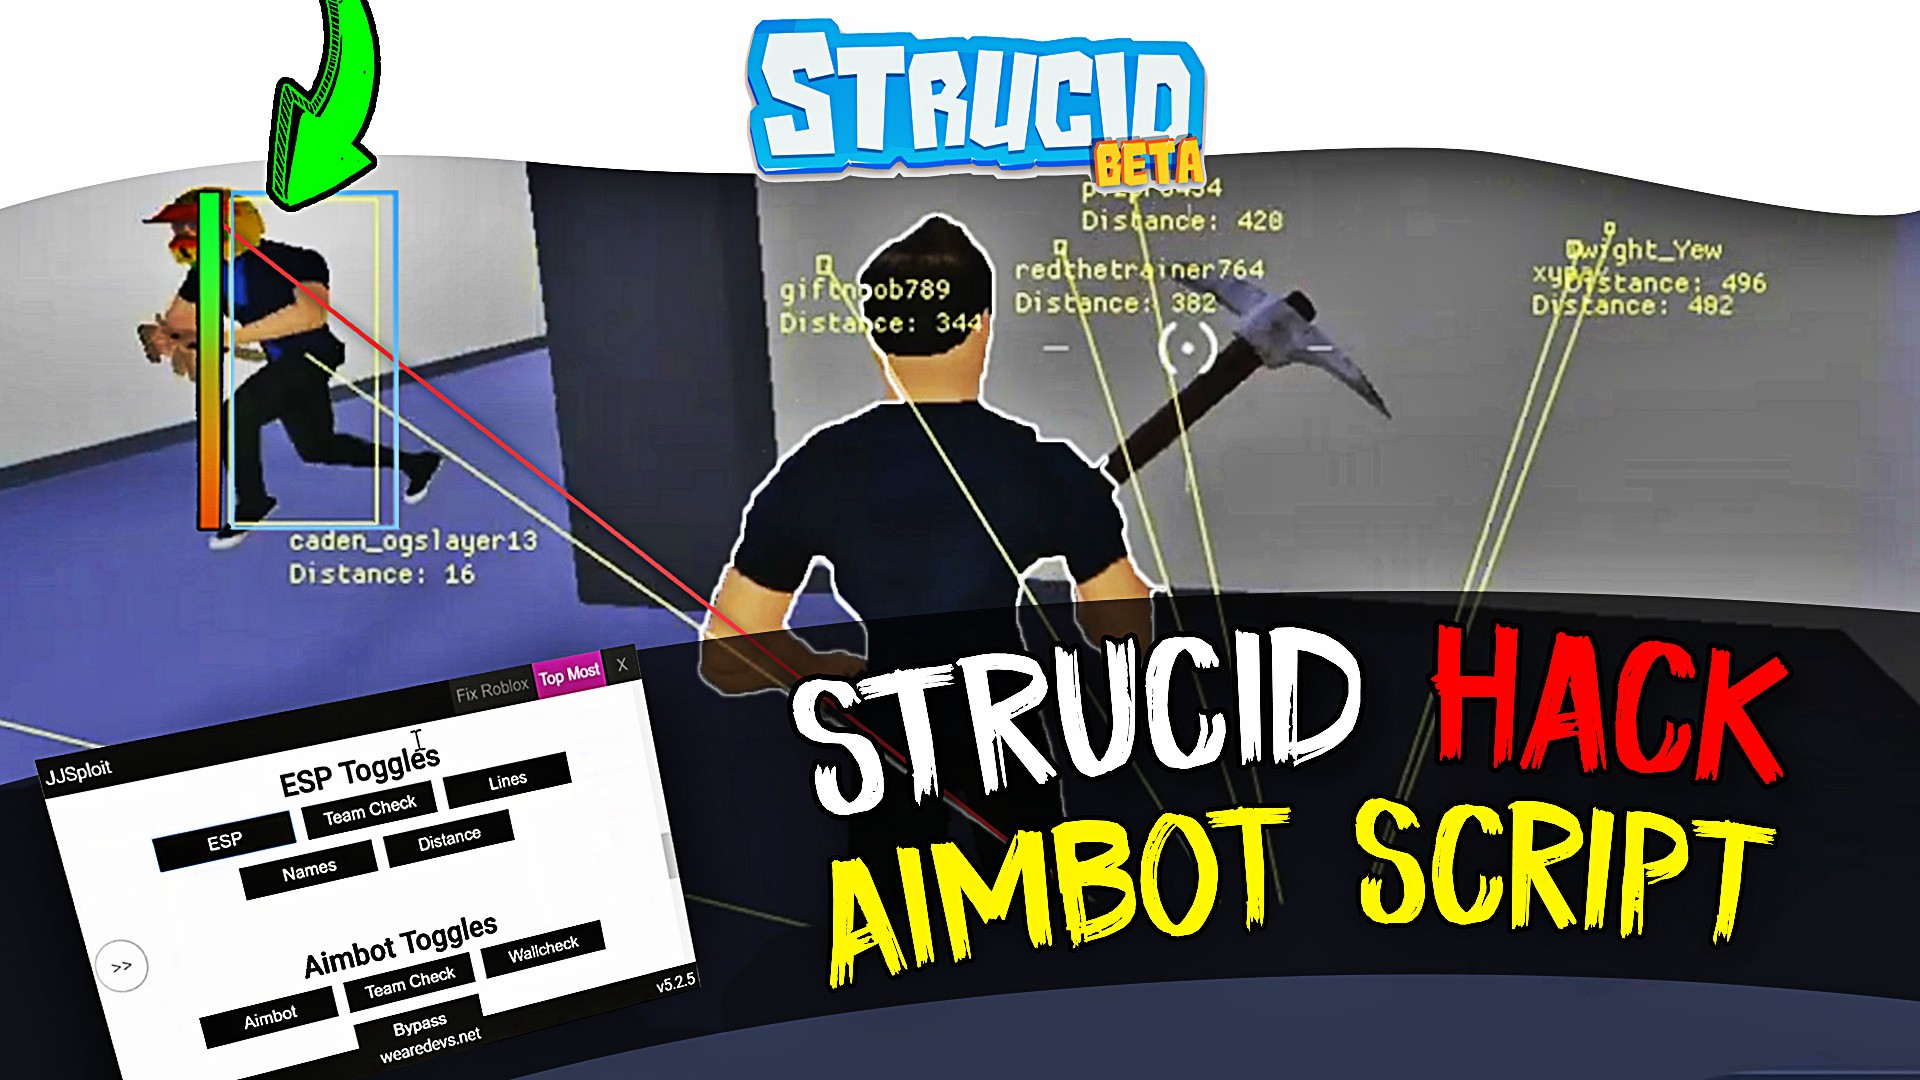 Strucid Aimbot : Strucid Aimbot Script 2077 / Kh 51utjuxcsm - toonallout : New gooies for this game on aim vx and other fun.